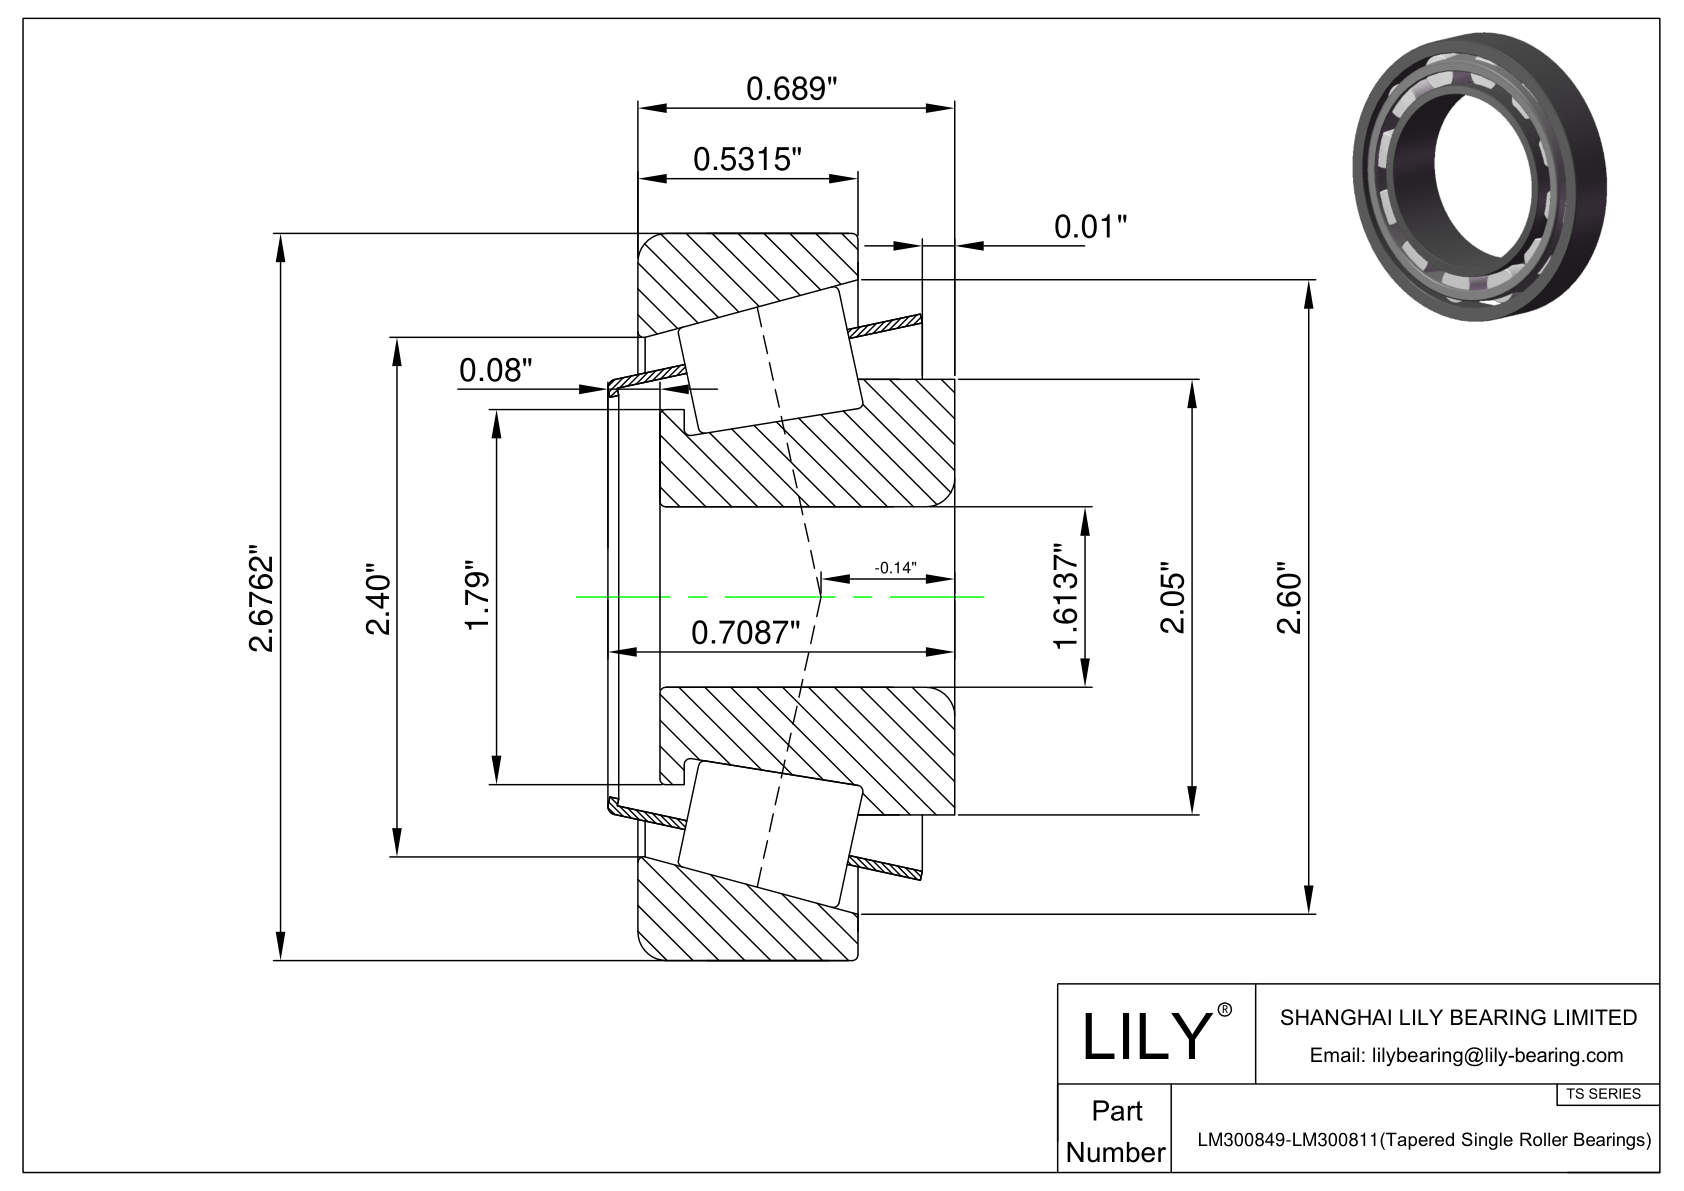 LM300849-LM300811 TS (Tapered Single Roller Bearings) (Imperial) cad drawing